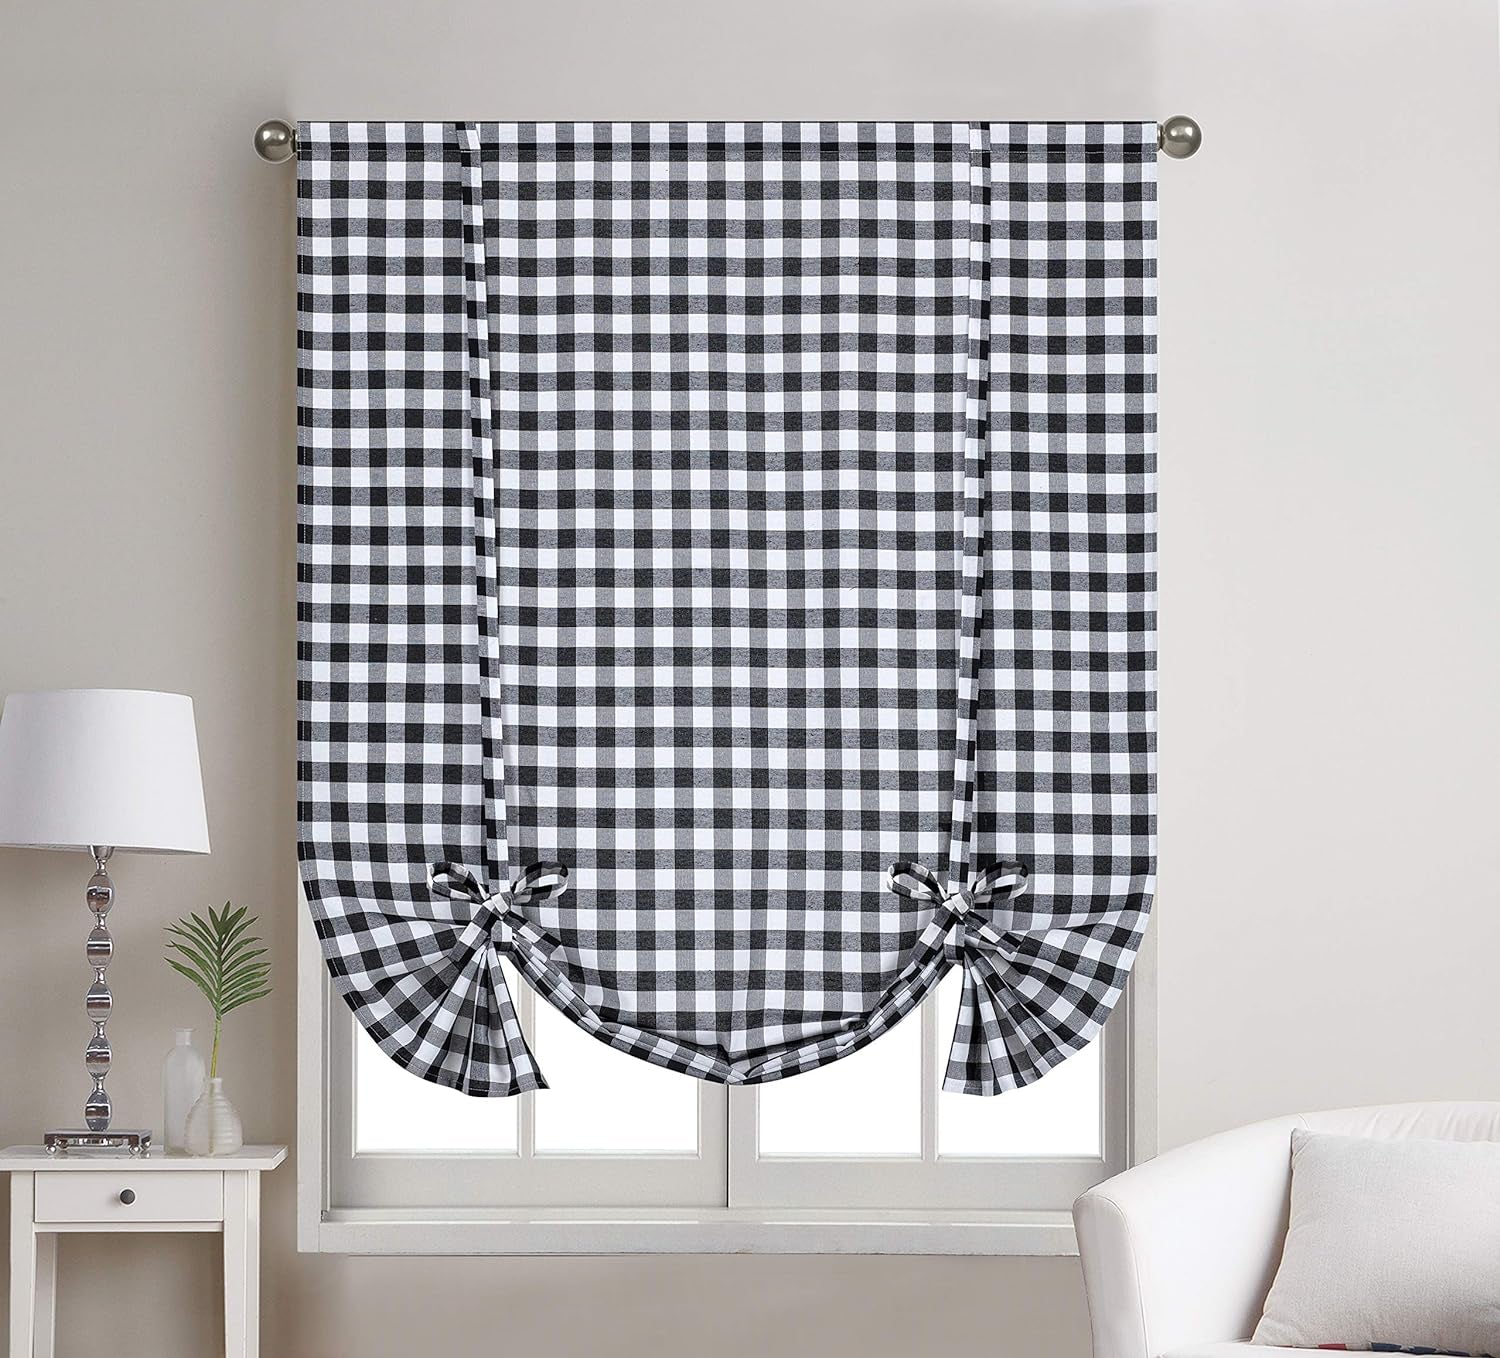 1 Piece Buffalo Check Plaid Gingham Rod Pocket Window Tie up Shade Curtain Panel (42" X 63", Taupe/Beige)